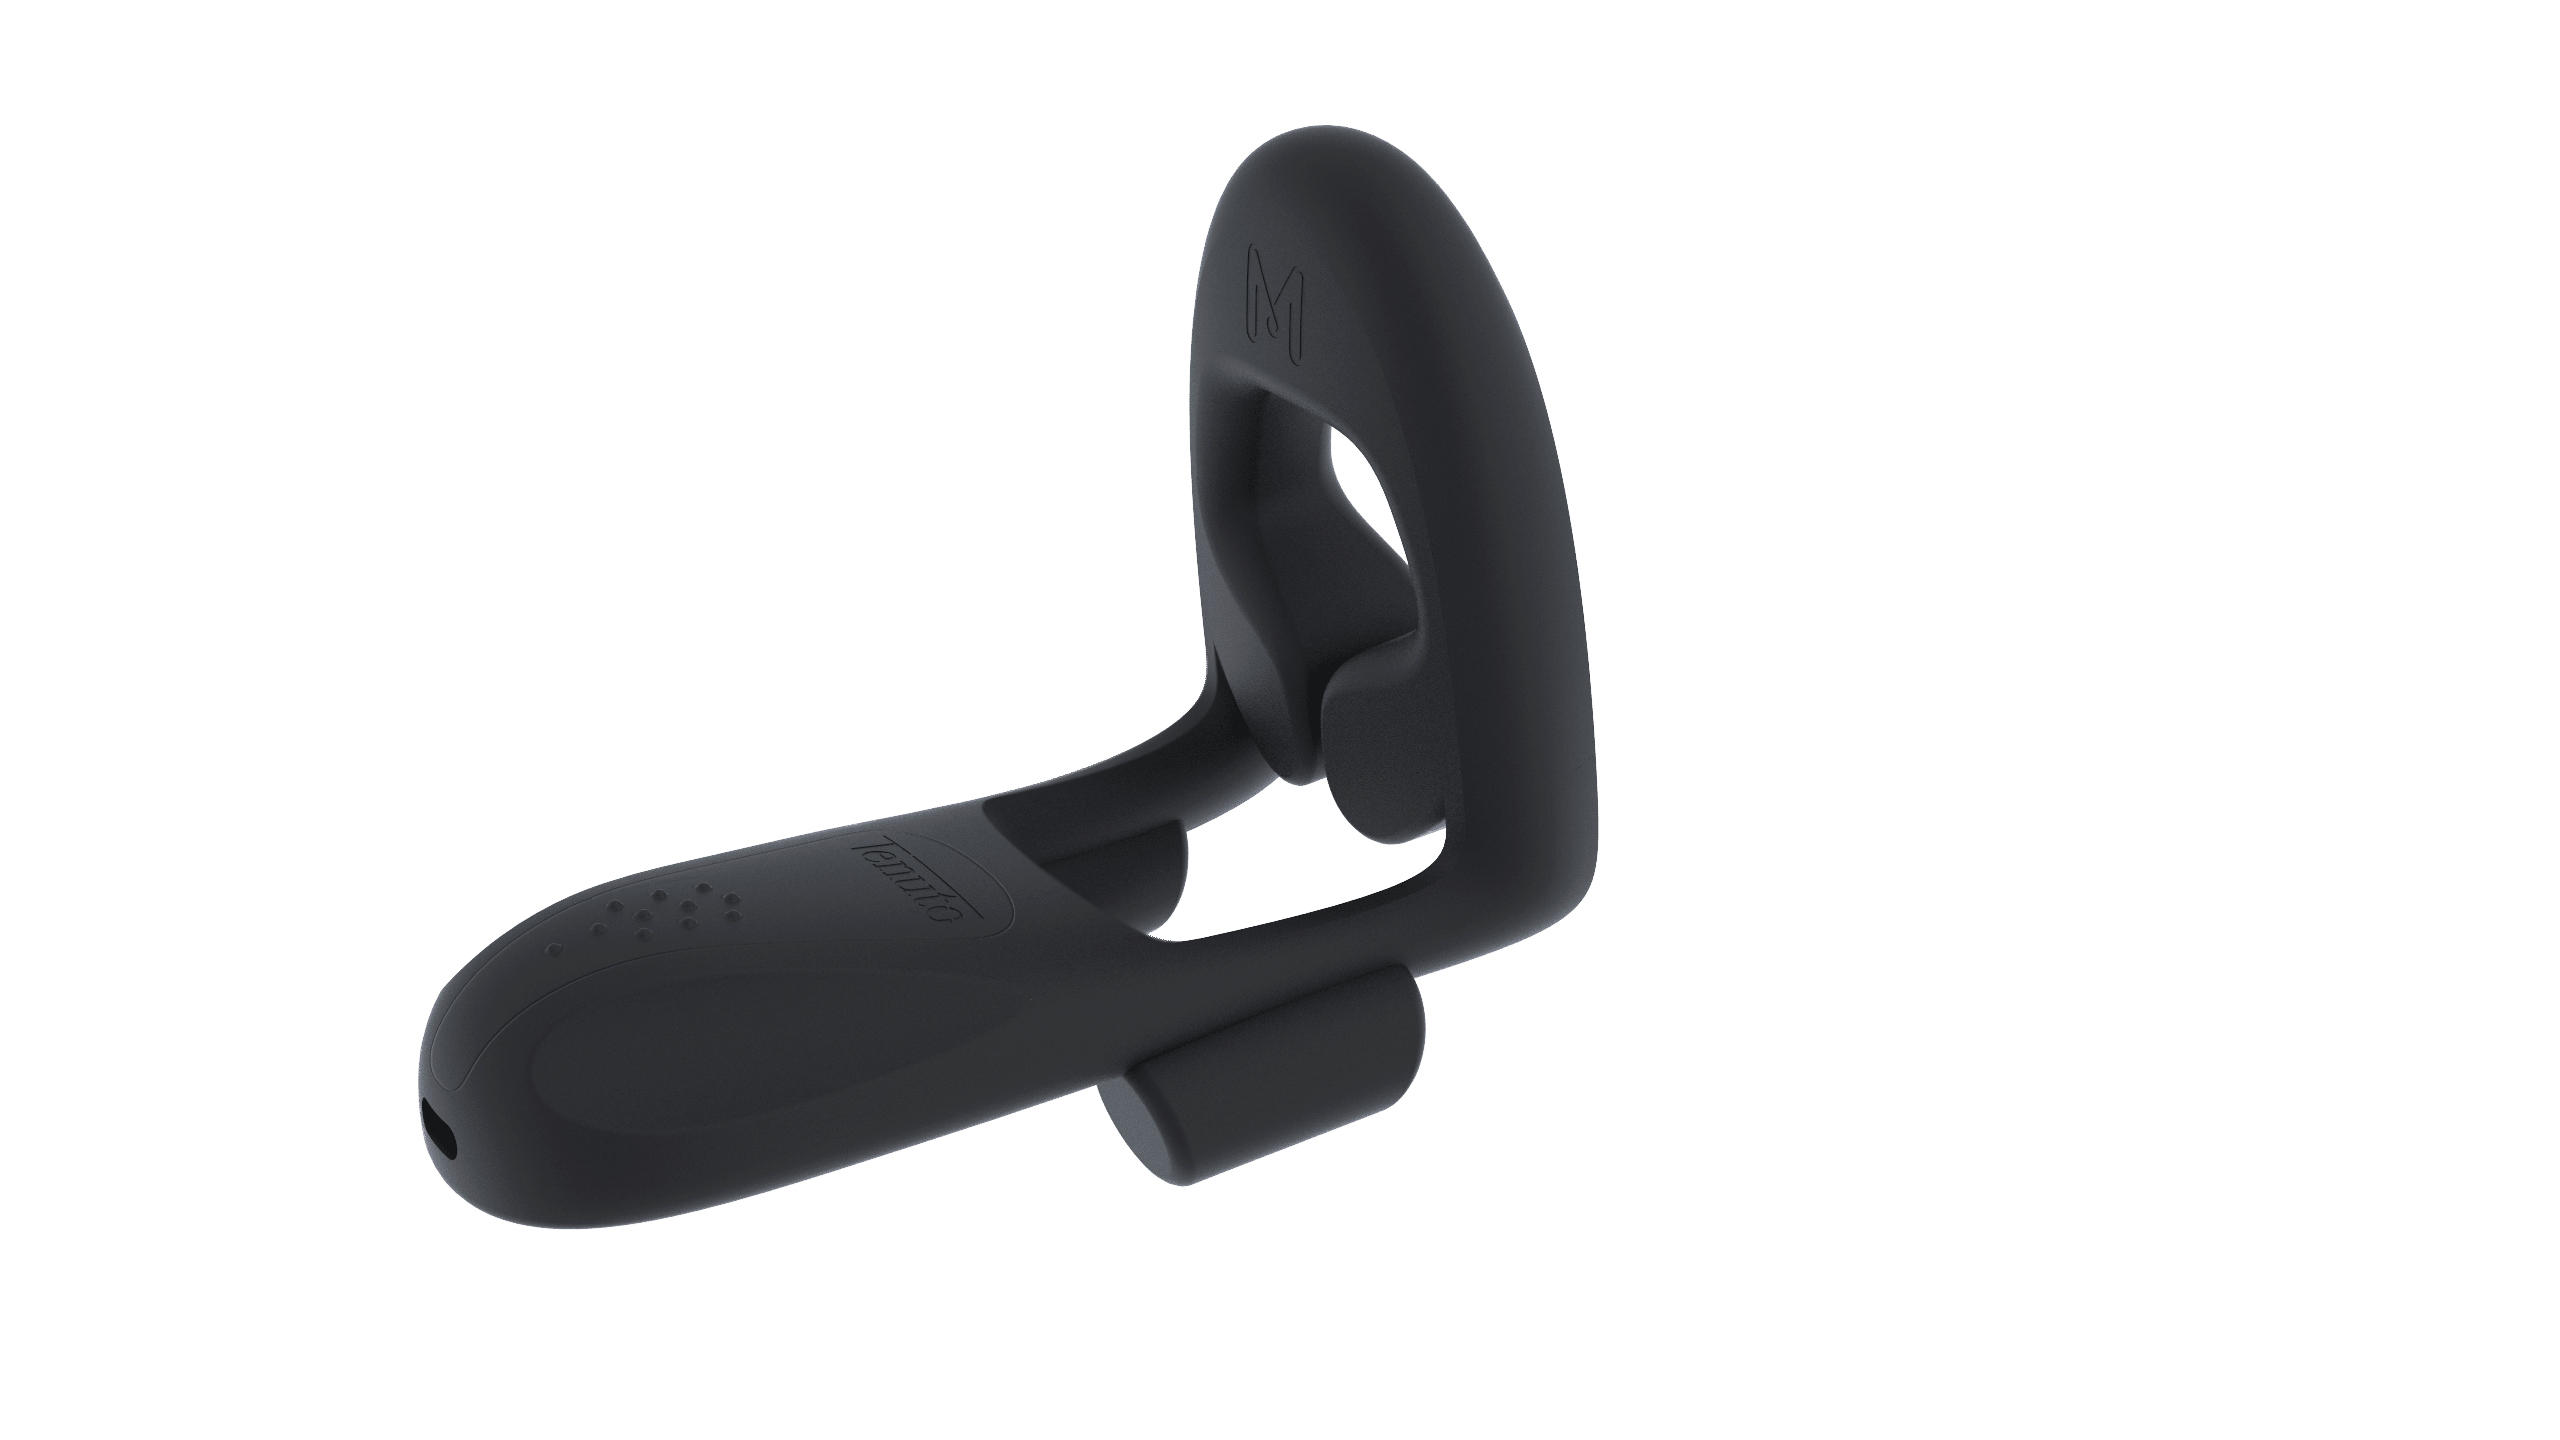 A black MysteryVibe Tenuto holder with a handle on it.